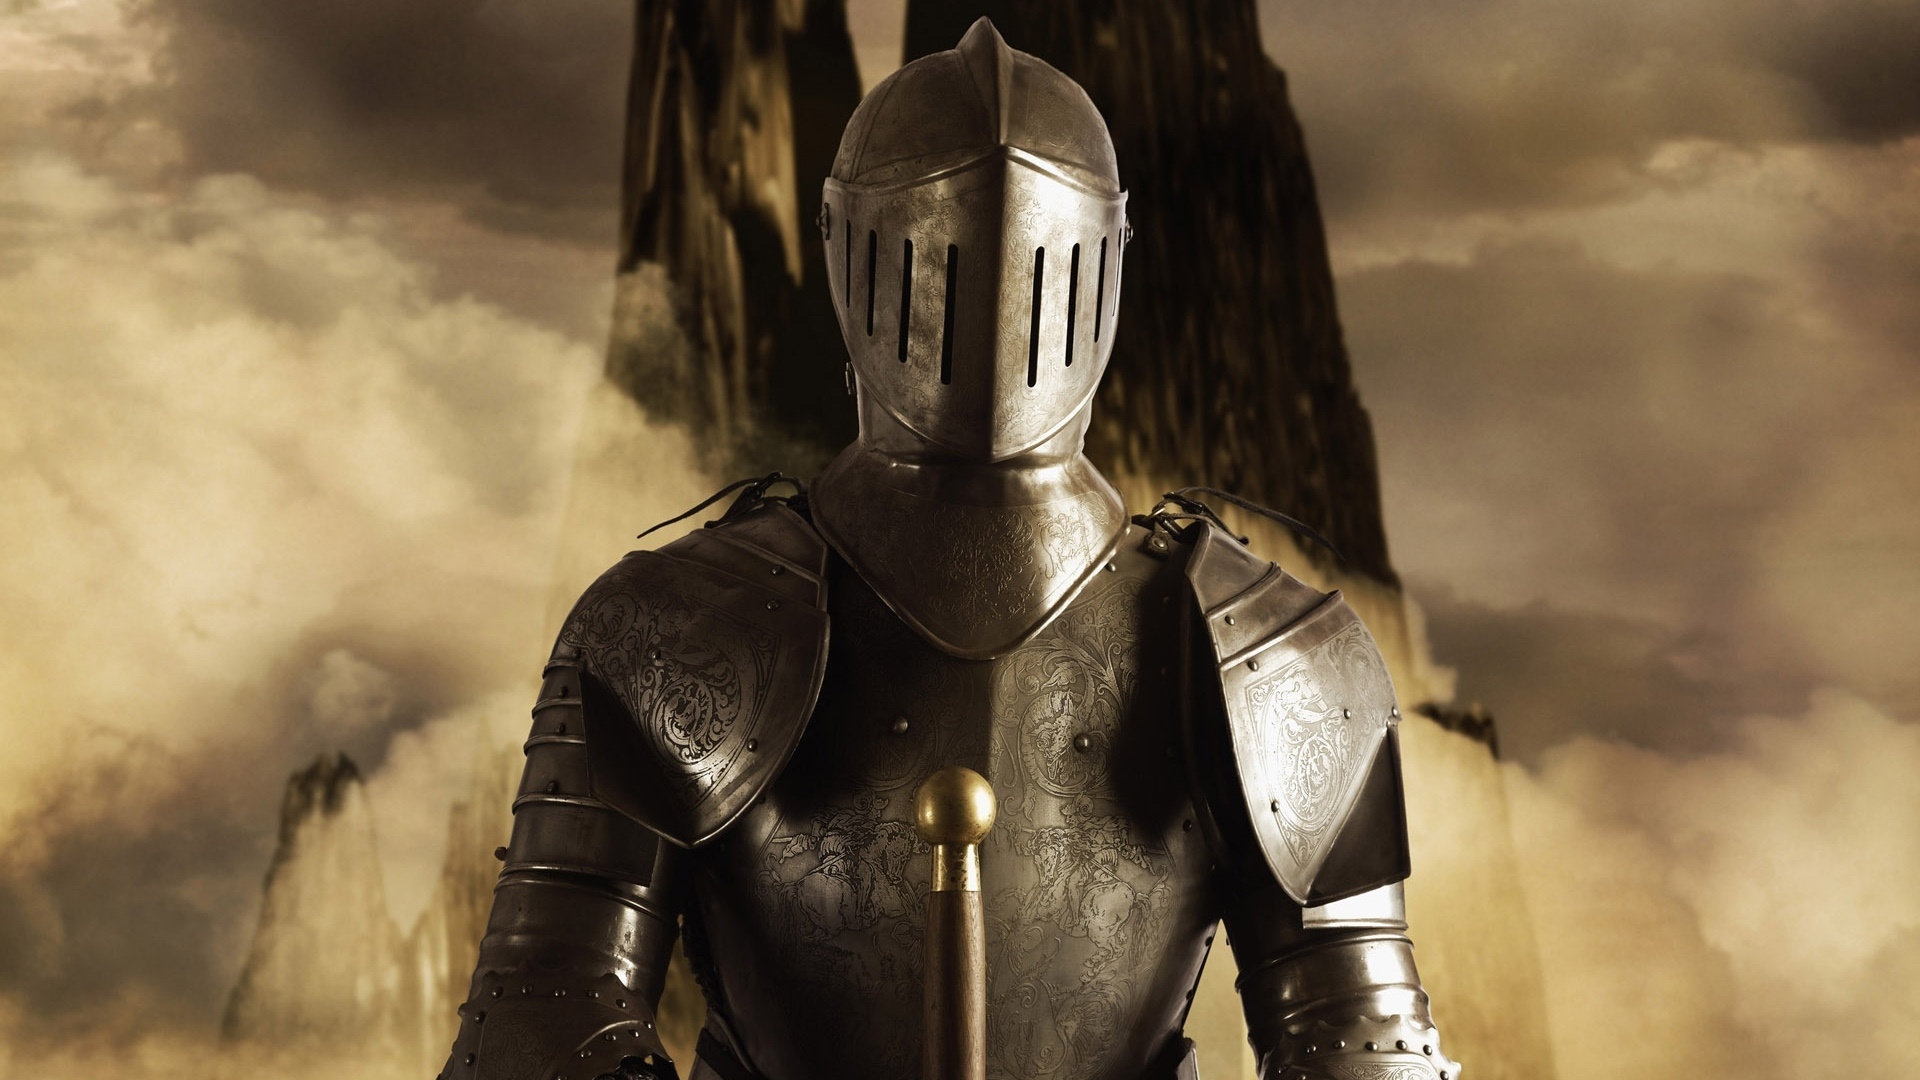 Knight for 1920 x 1080 HDTV 1080p resolution